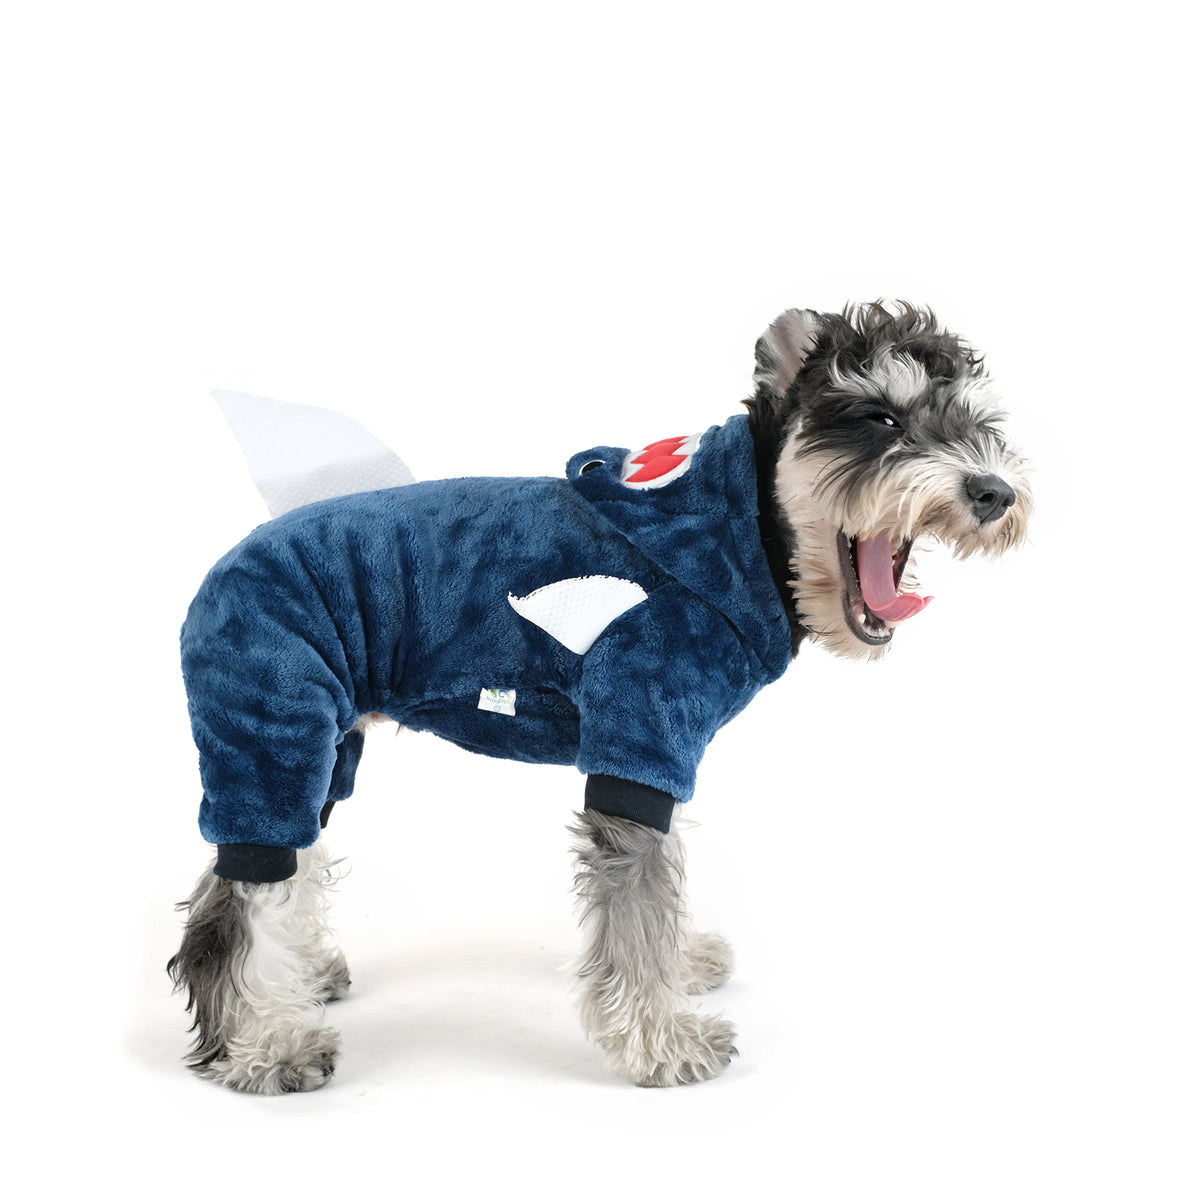 Innopet Shark Pet Costume - For Dogs and Cats - Perfect for Halloween, Christmas, Cosplay and Fancy Dress Parties